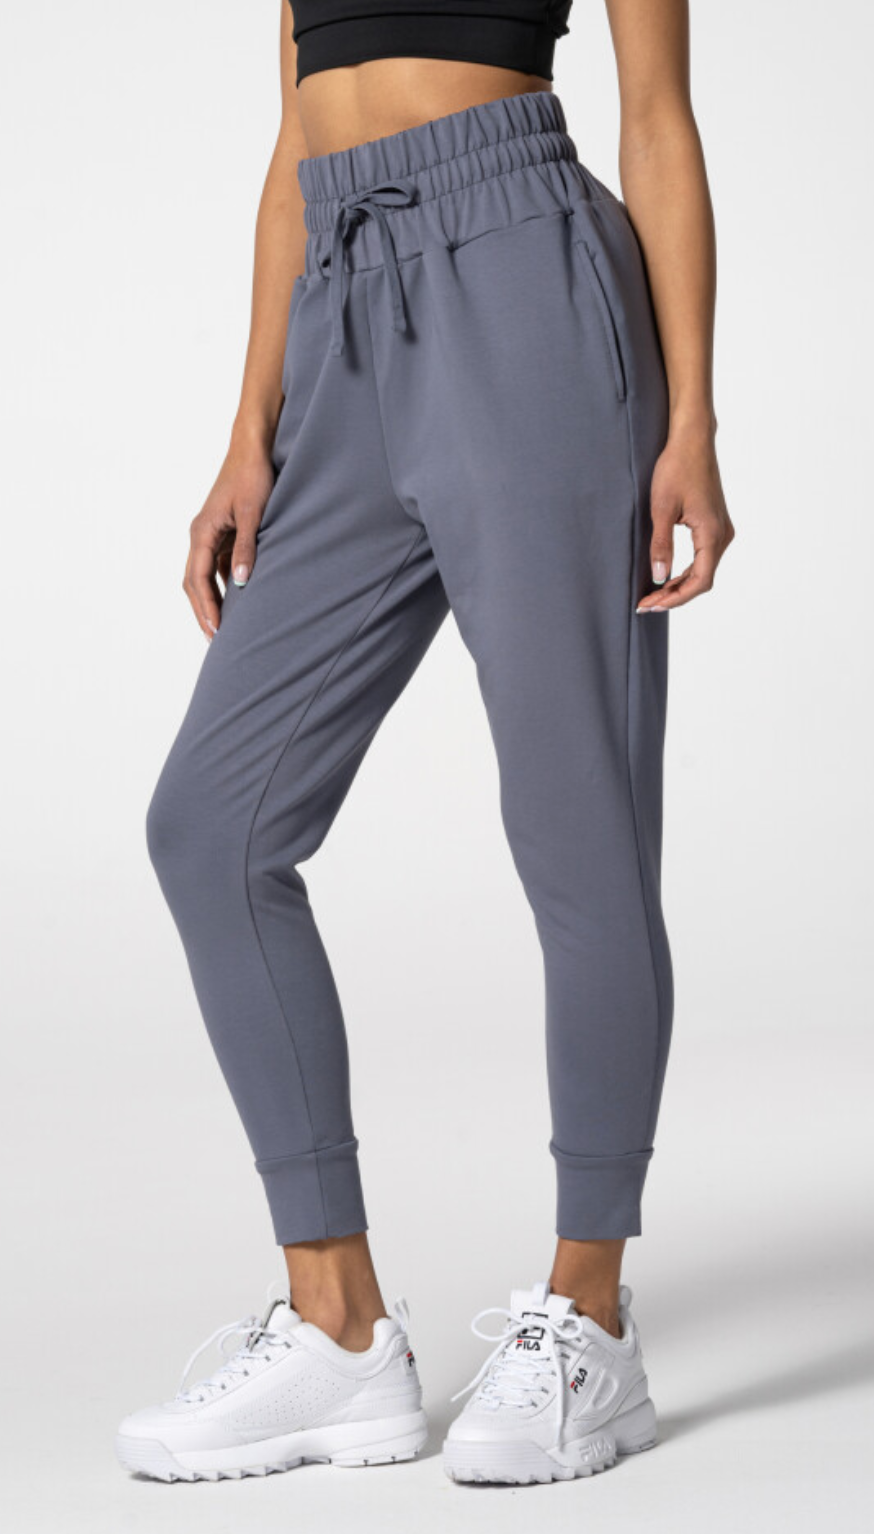 Carpatree Fair Sweatpants - Grey jogger style tracksuit bottoms with deep elasticated high waist that ties and pockets. Made of strong stretch cotton.